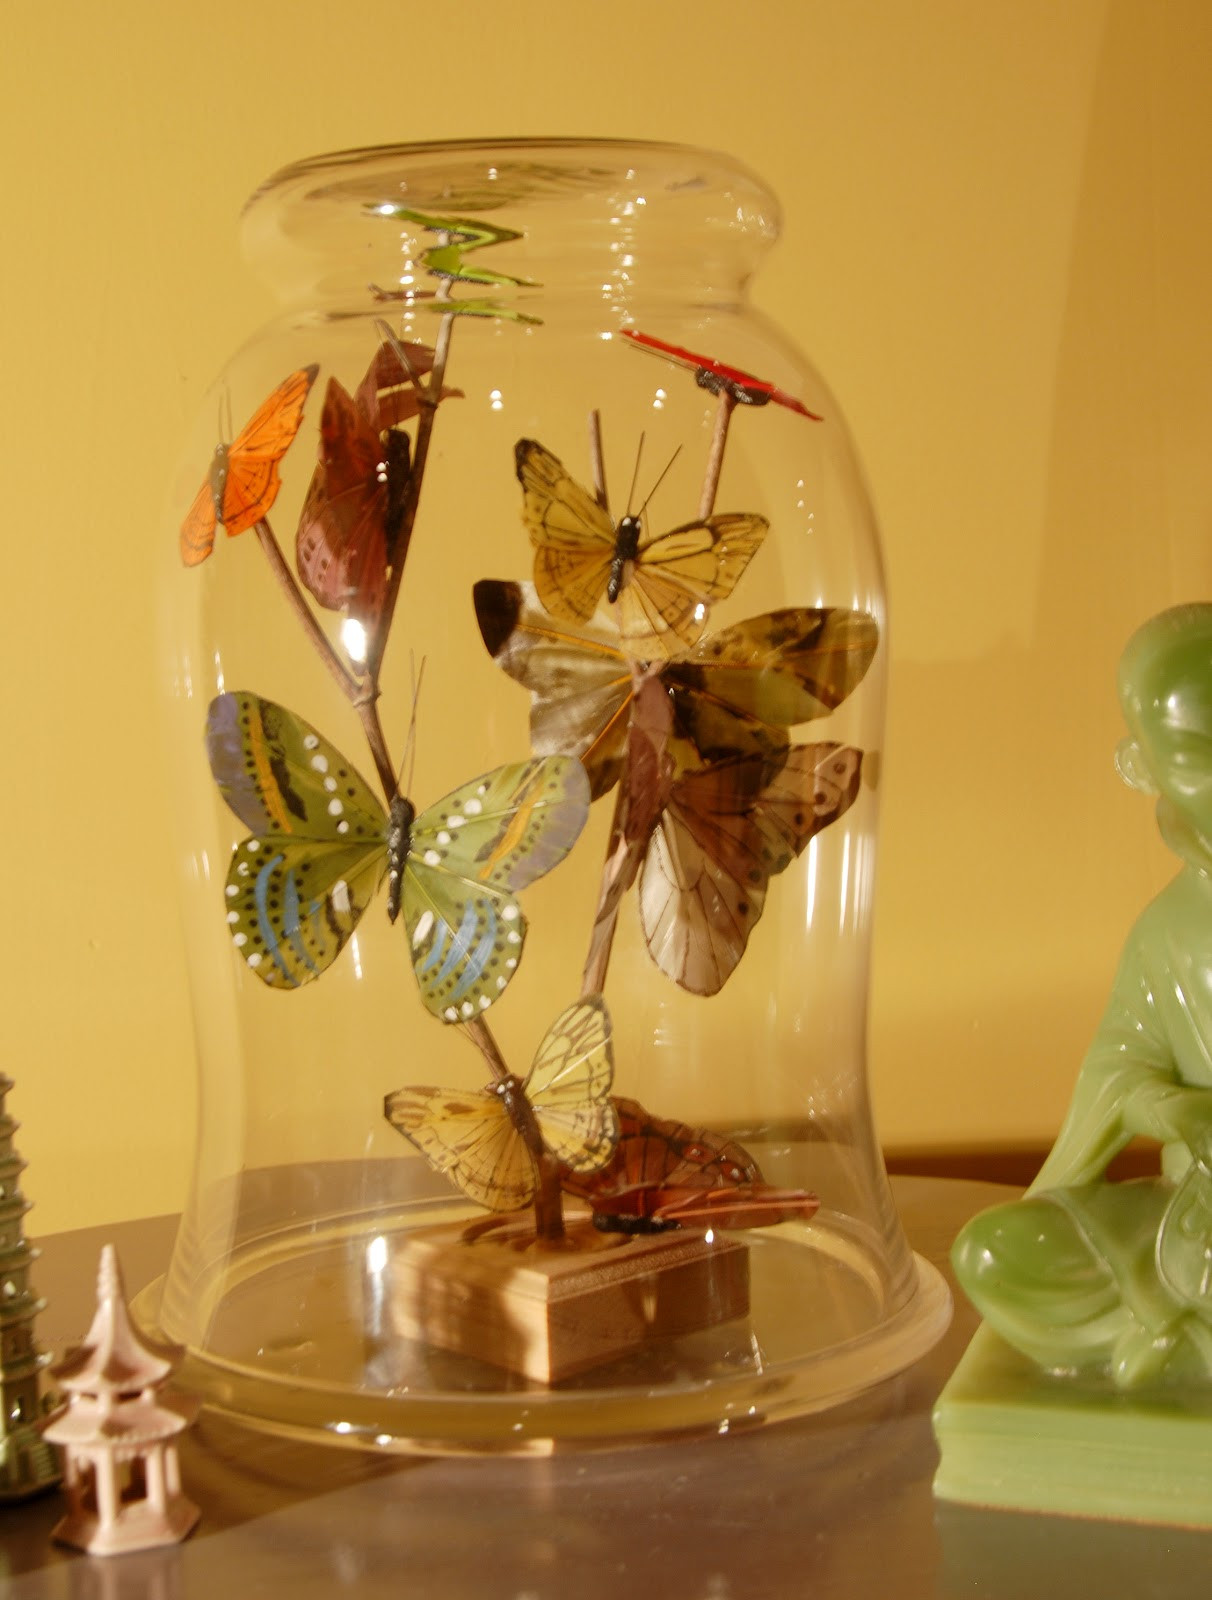 Arts And Craft Ideas For Adults
 Mark Montano Butterflies Under Glass